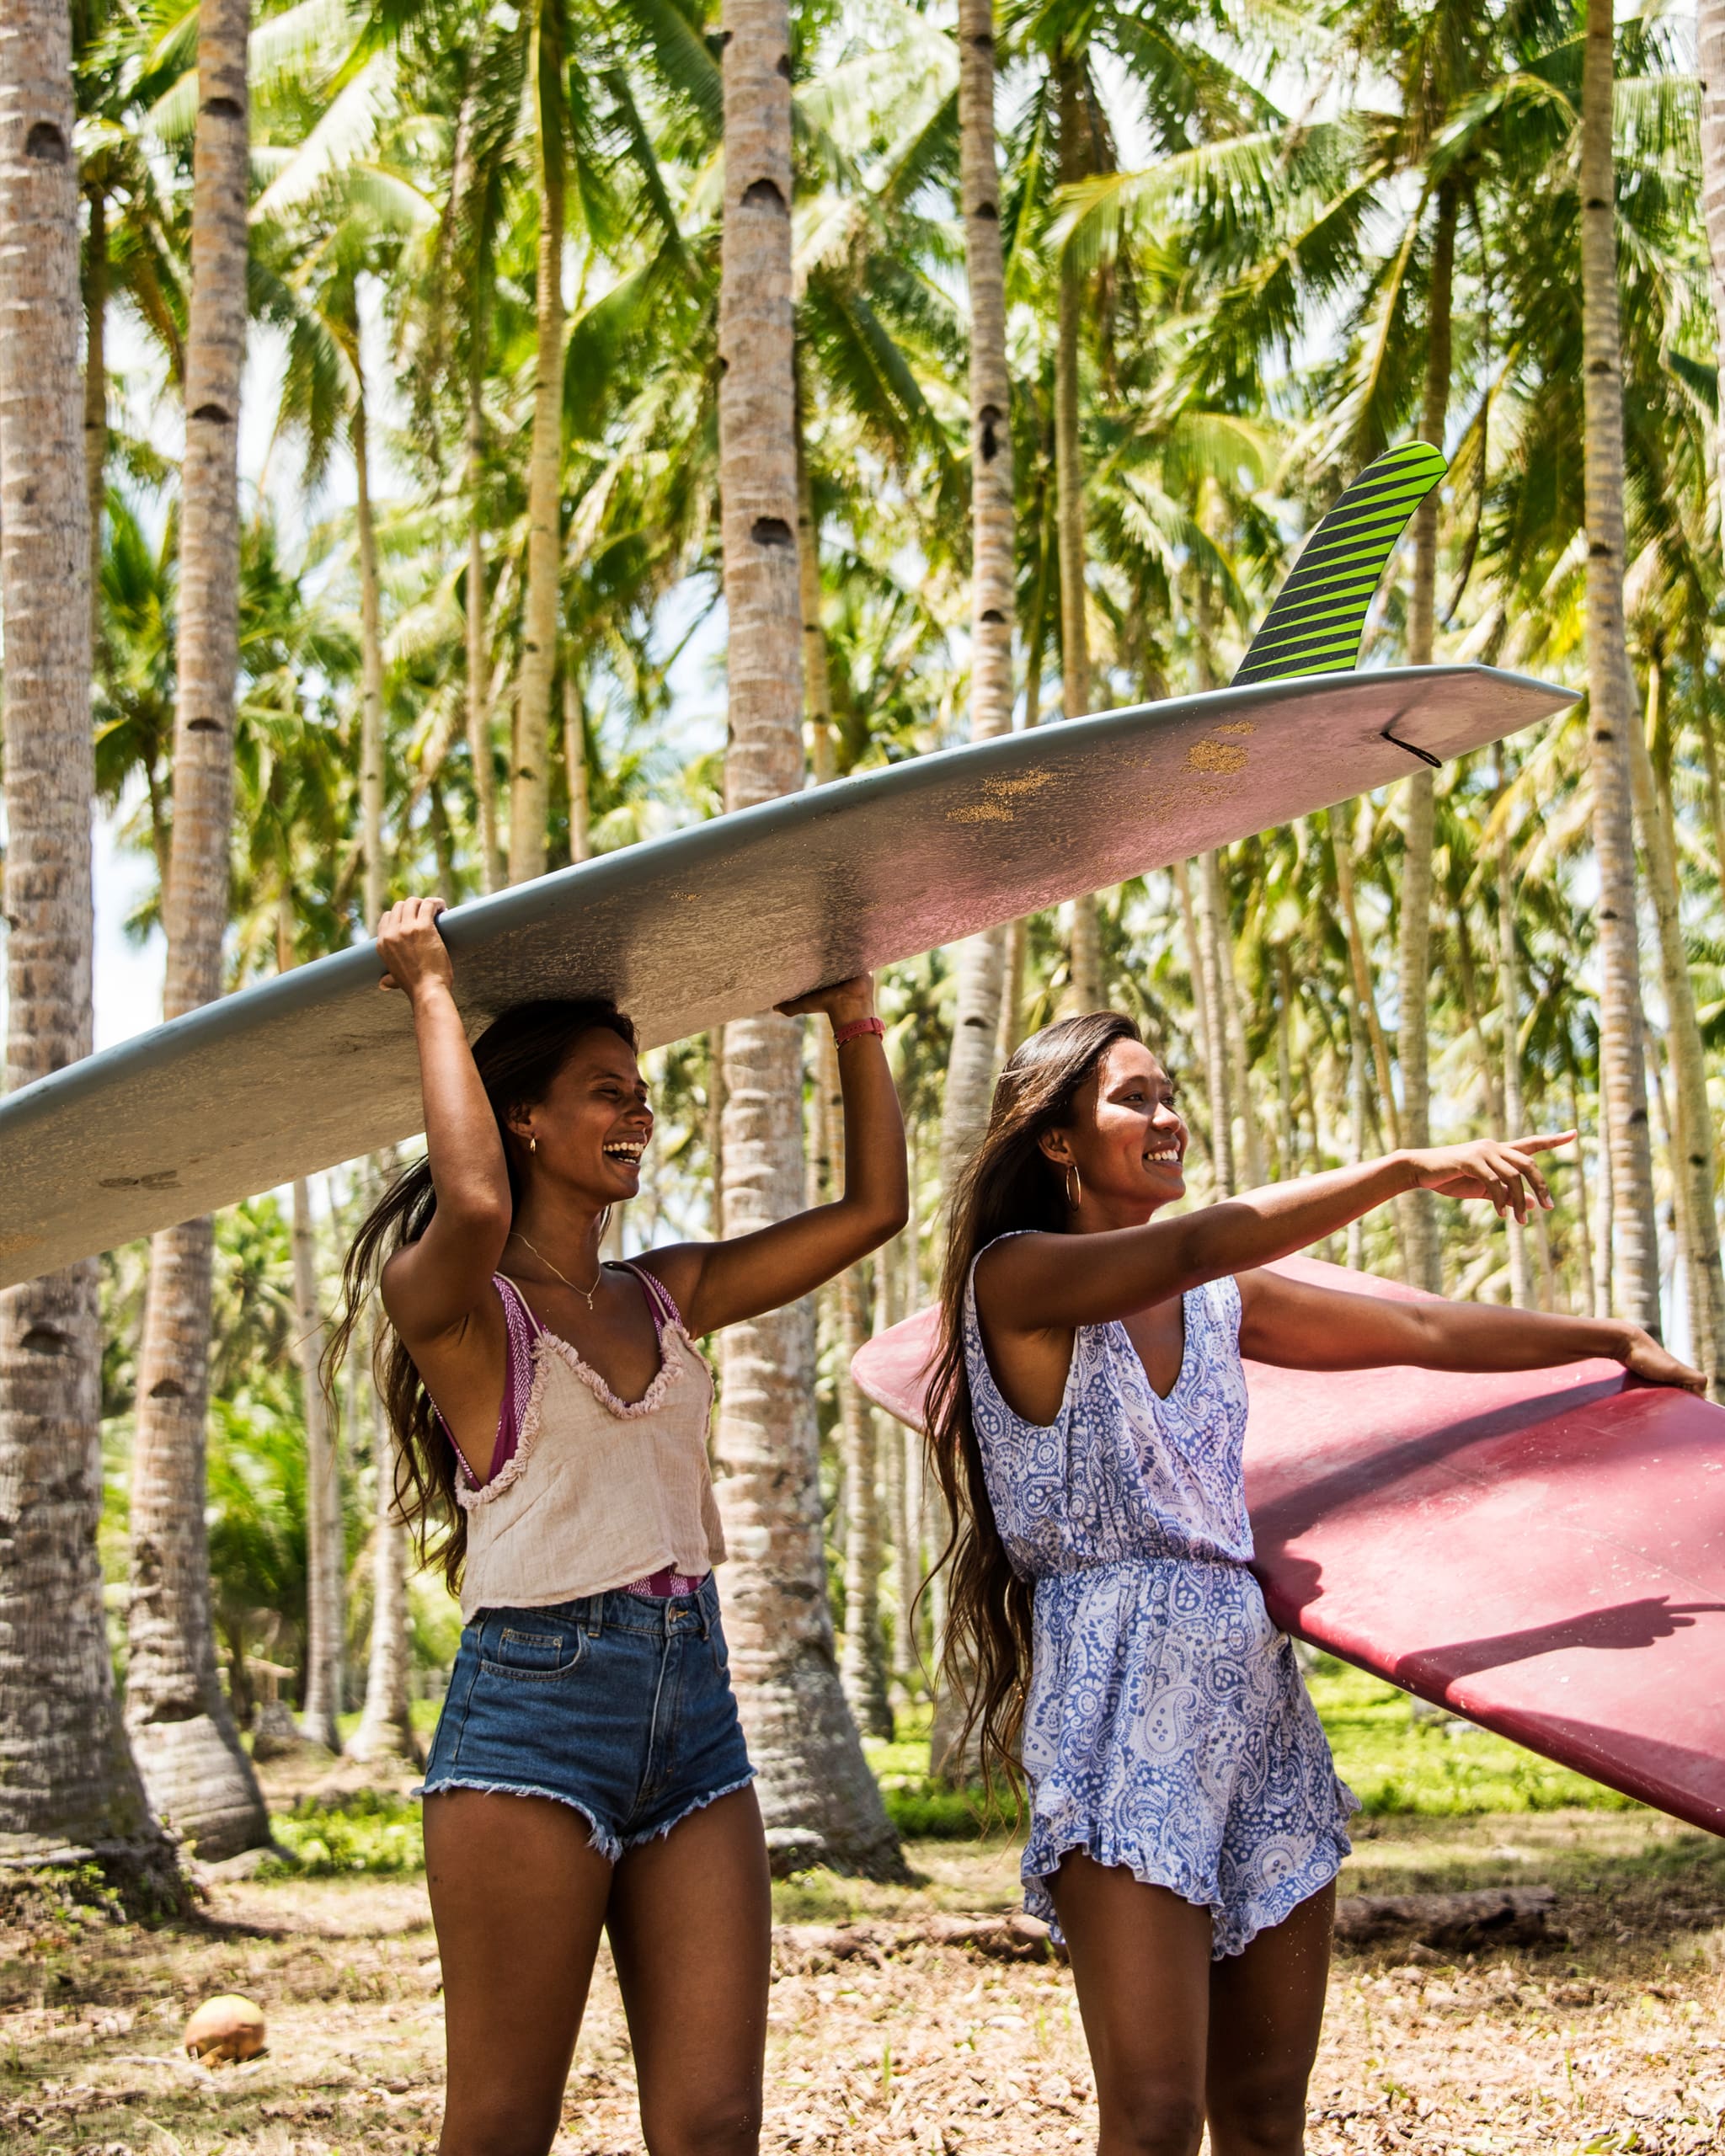 Ikit Agudo and Aping Agudo holding surfboards while walking in Siargao